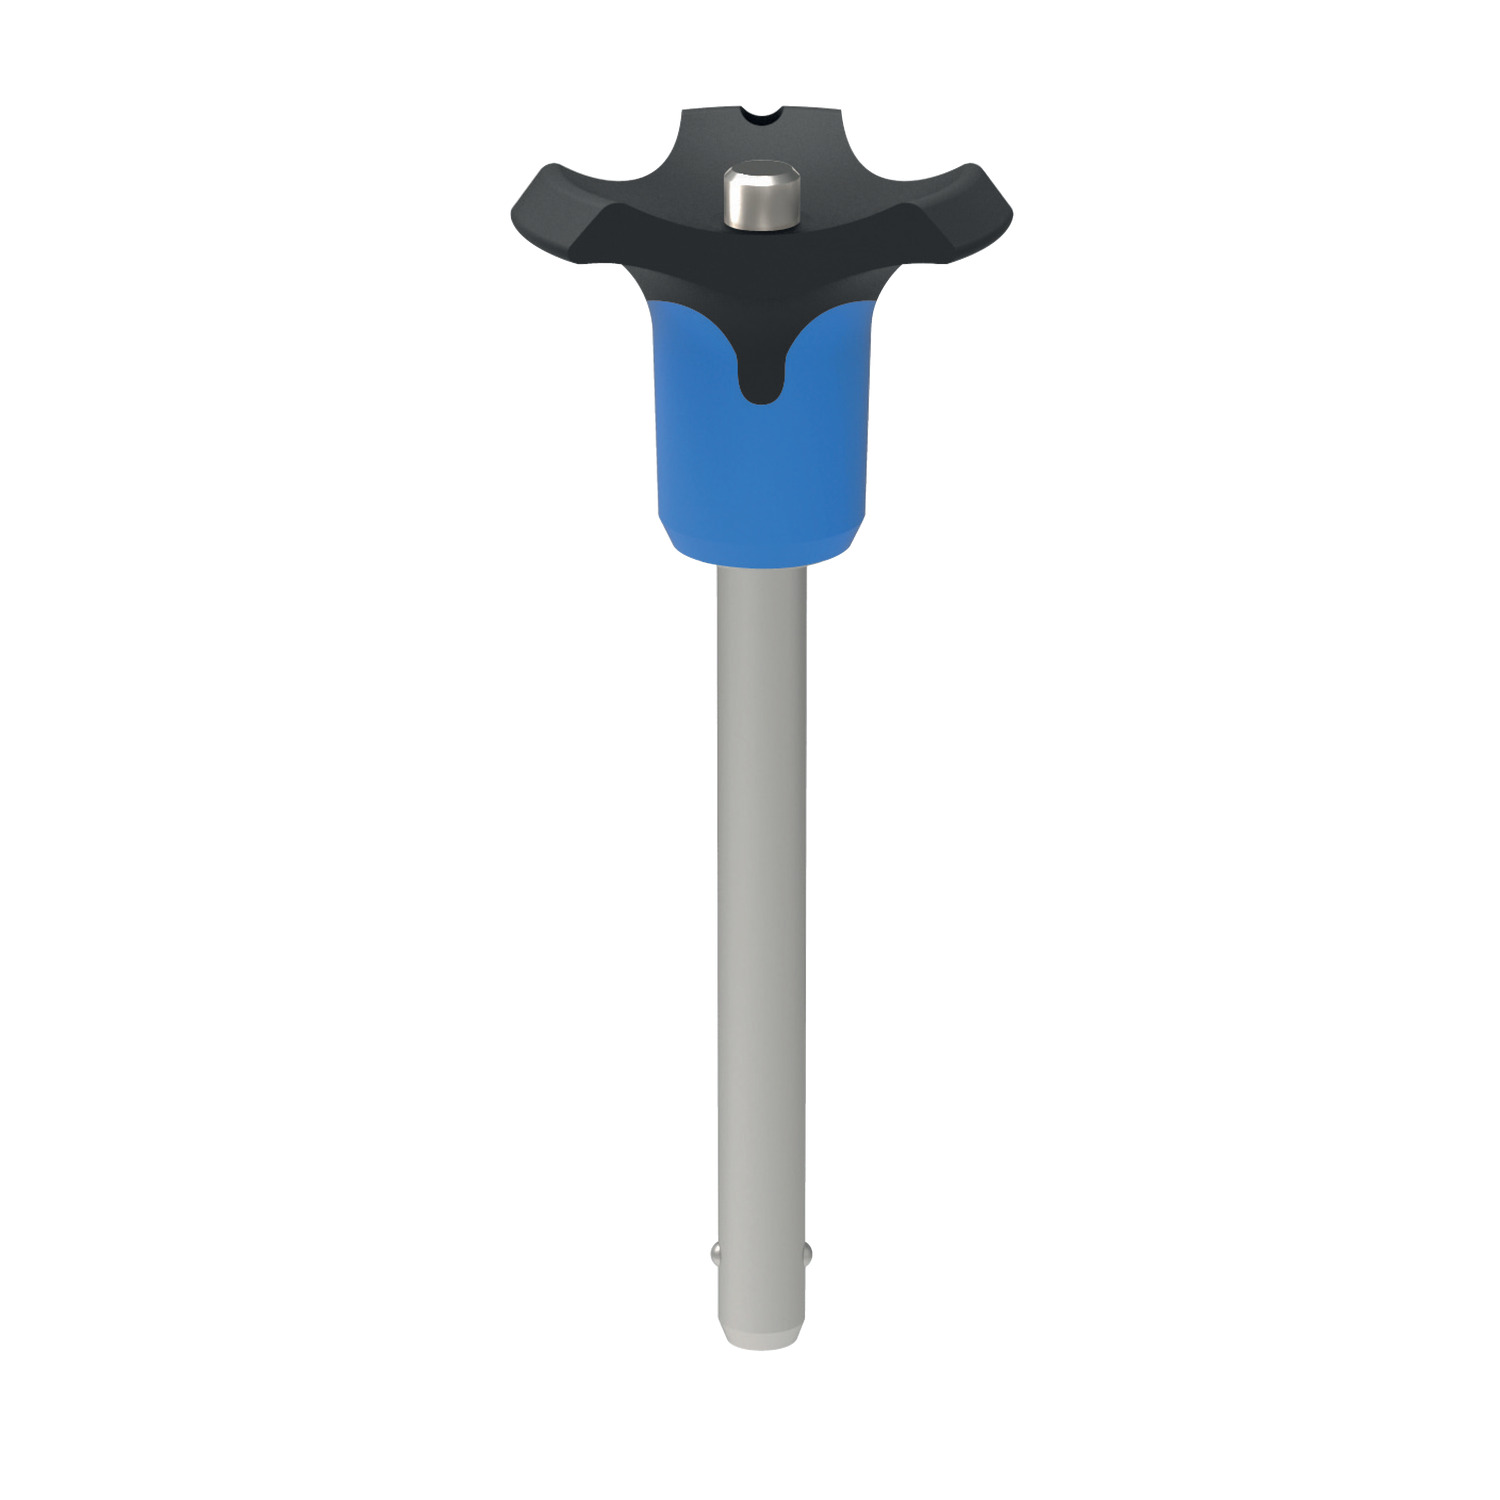 Product 33080.B, Ball Lock Pins - Single Acting - Blue Plastic Handle self-locking - stainless steel 1.4305 (AISI 303) / 